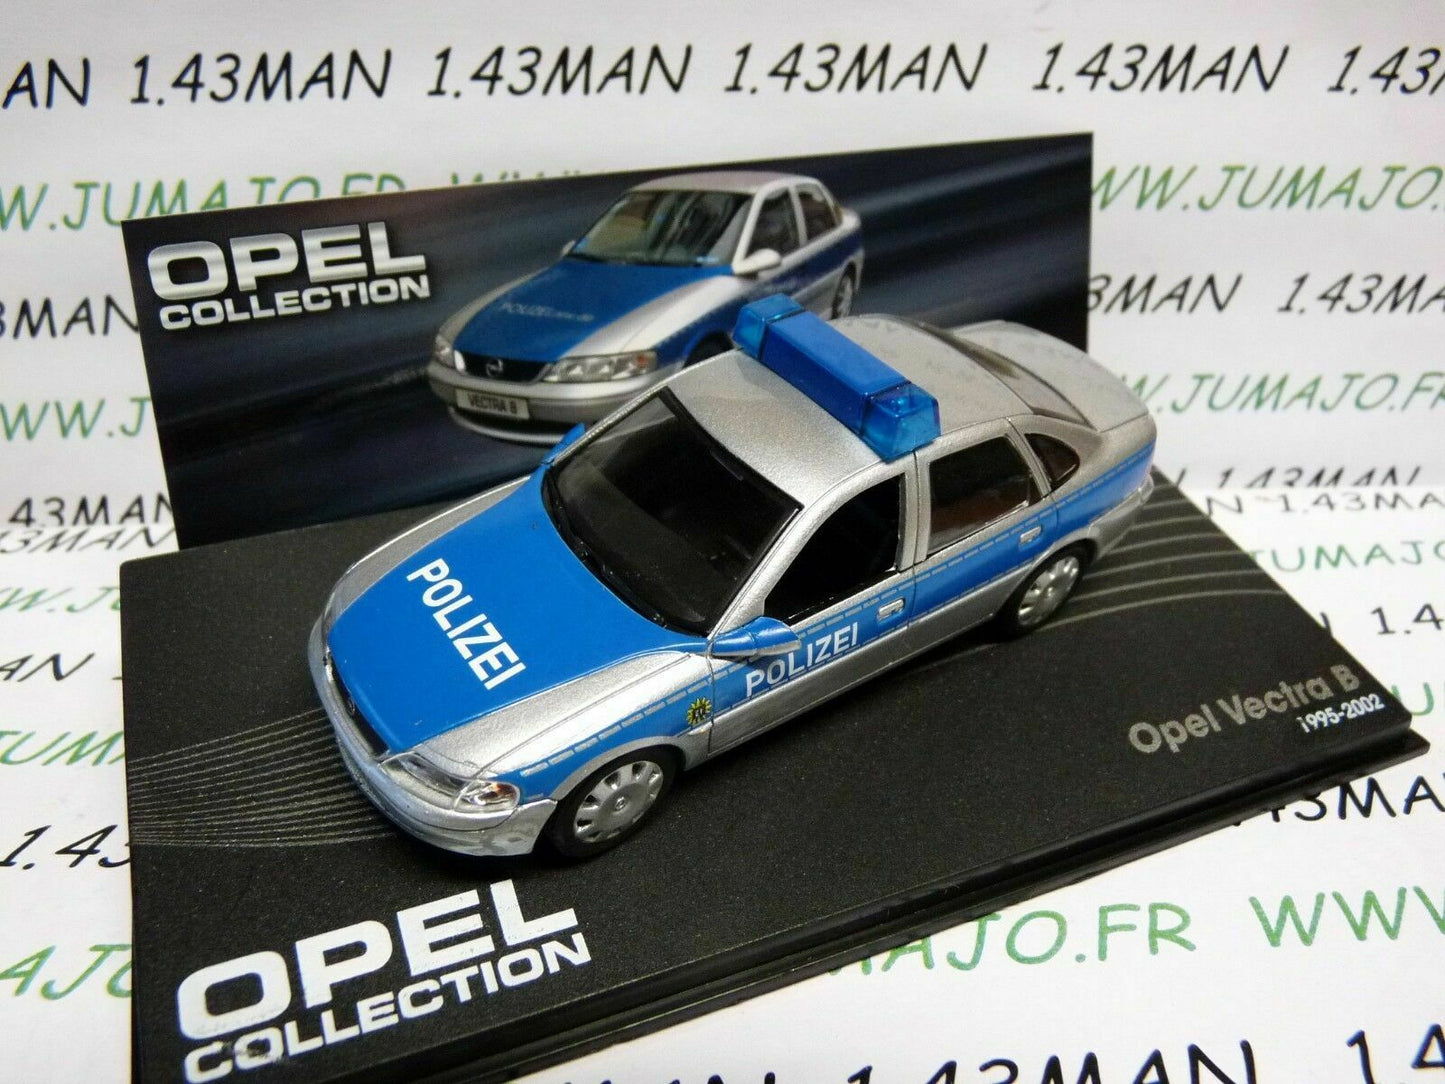 OPE45 voiture 1/43 IXO OPEL collection : VECTRA B Polizei police 1995/2002